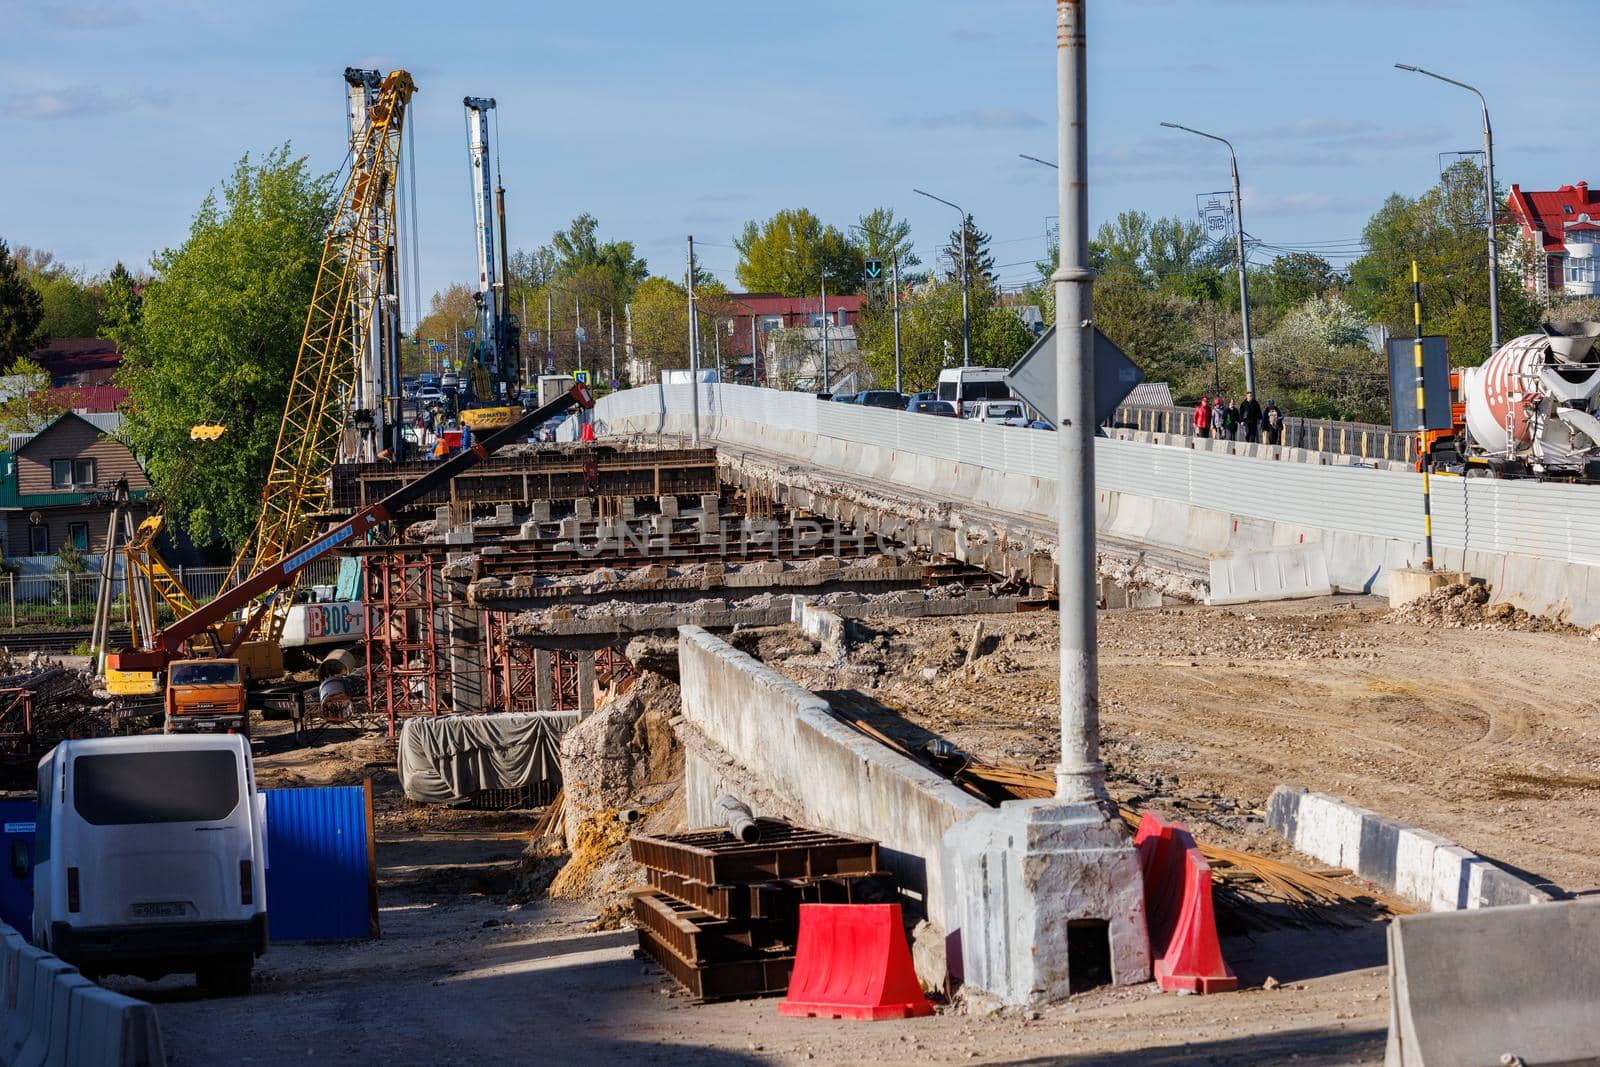 Bridge reconstruction process at summer day in Tula, Russia - April 23, 2022. Telephoto view with narrow angle.